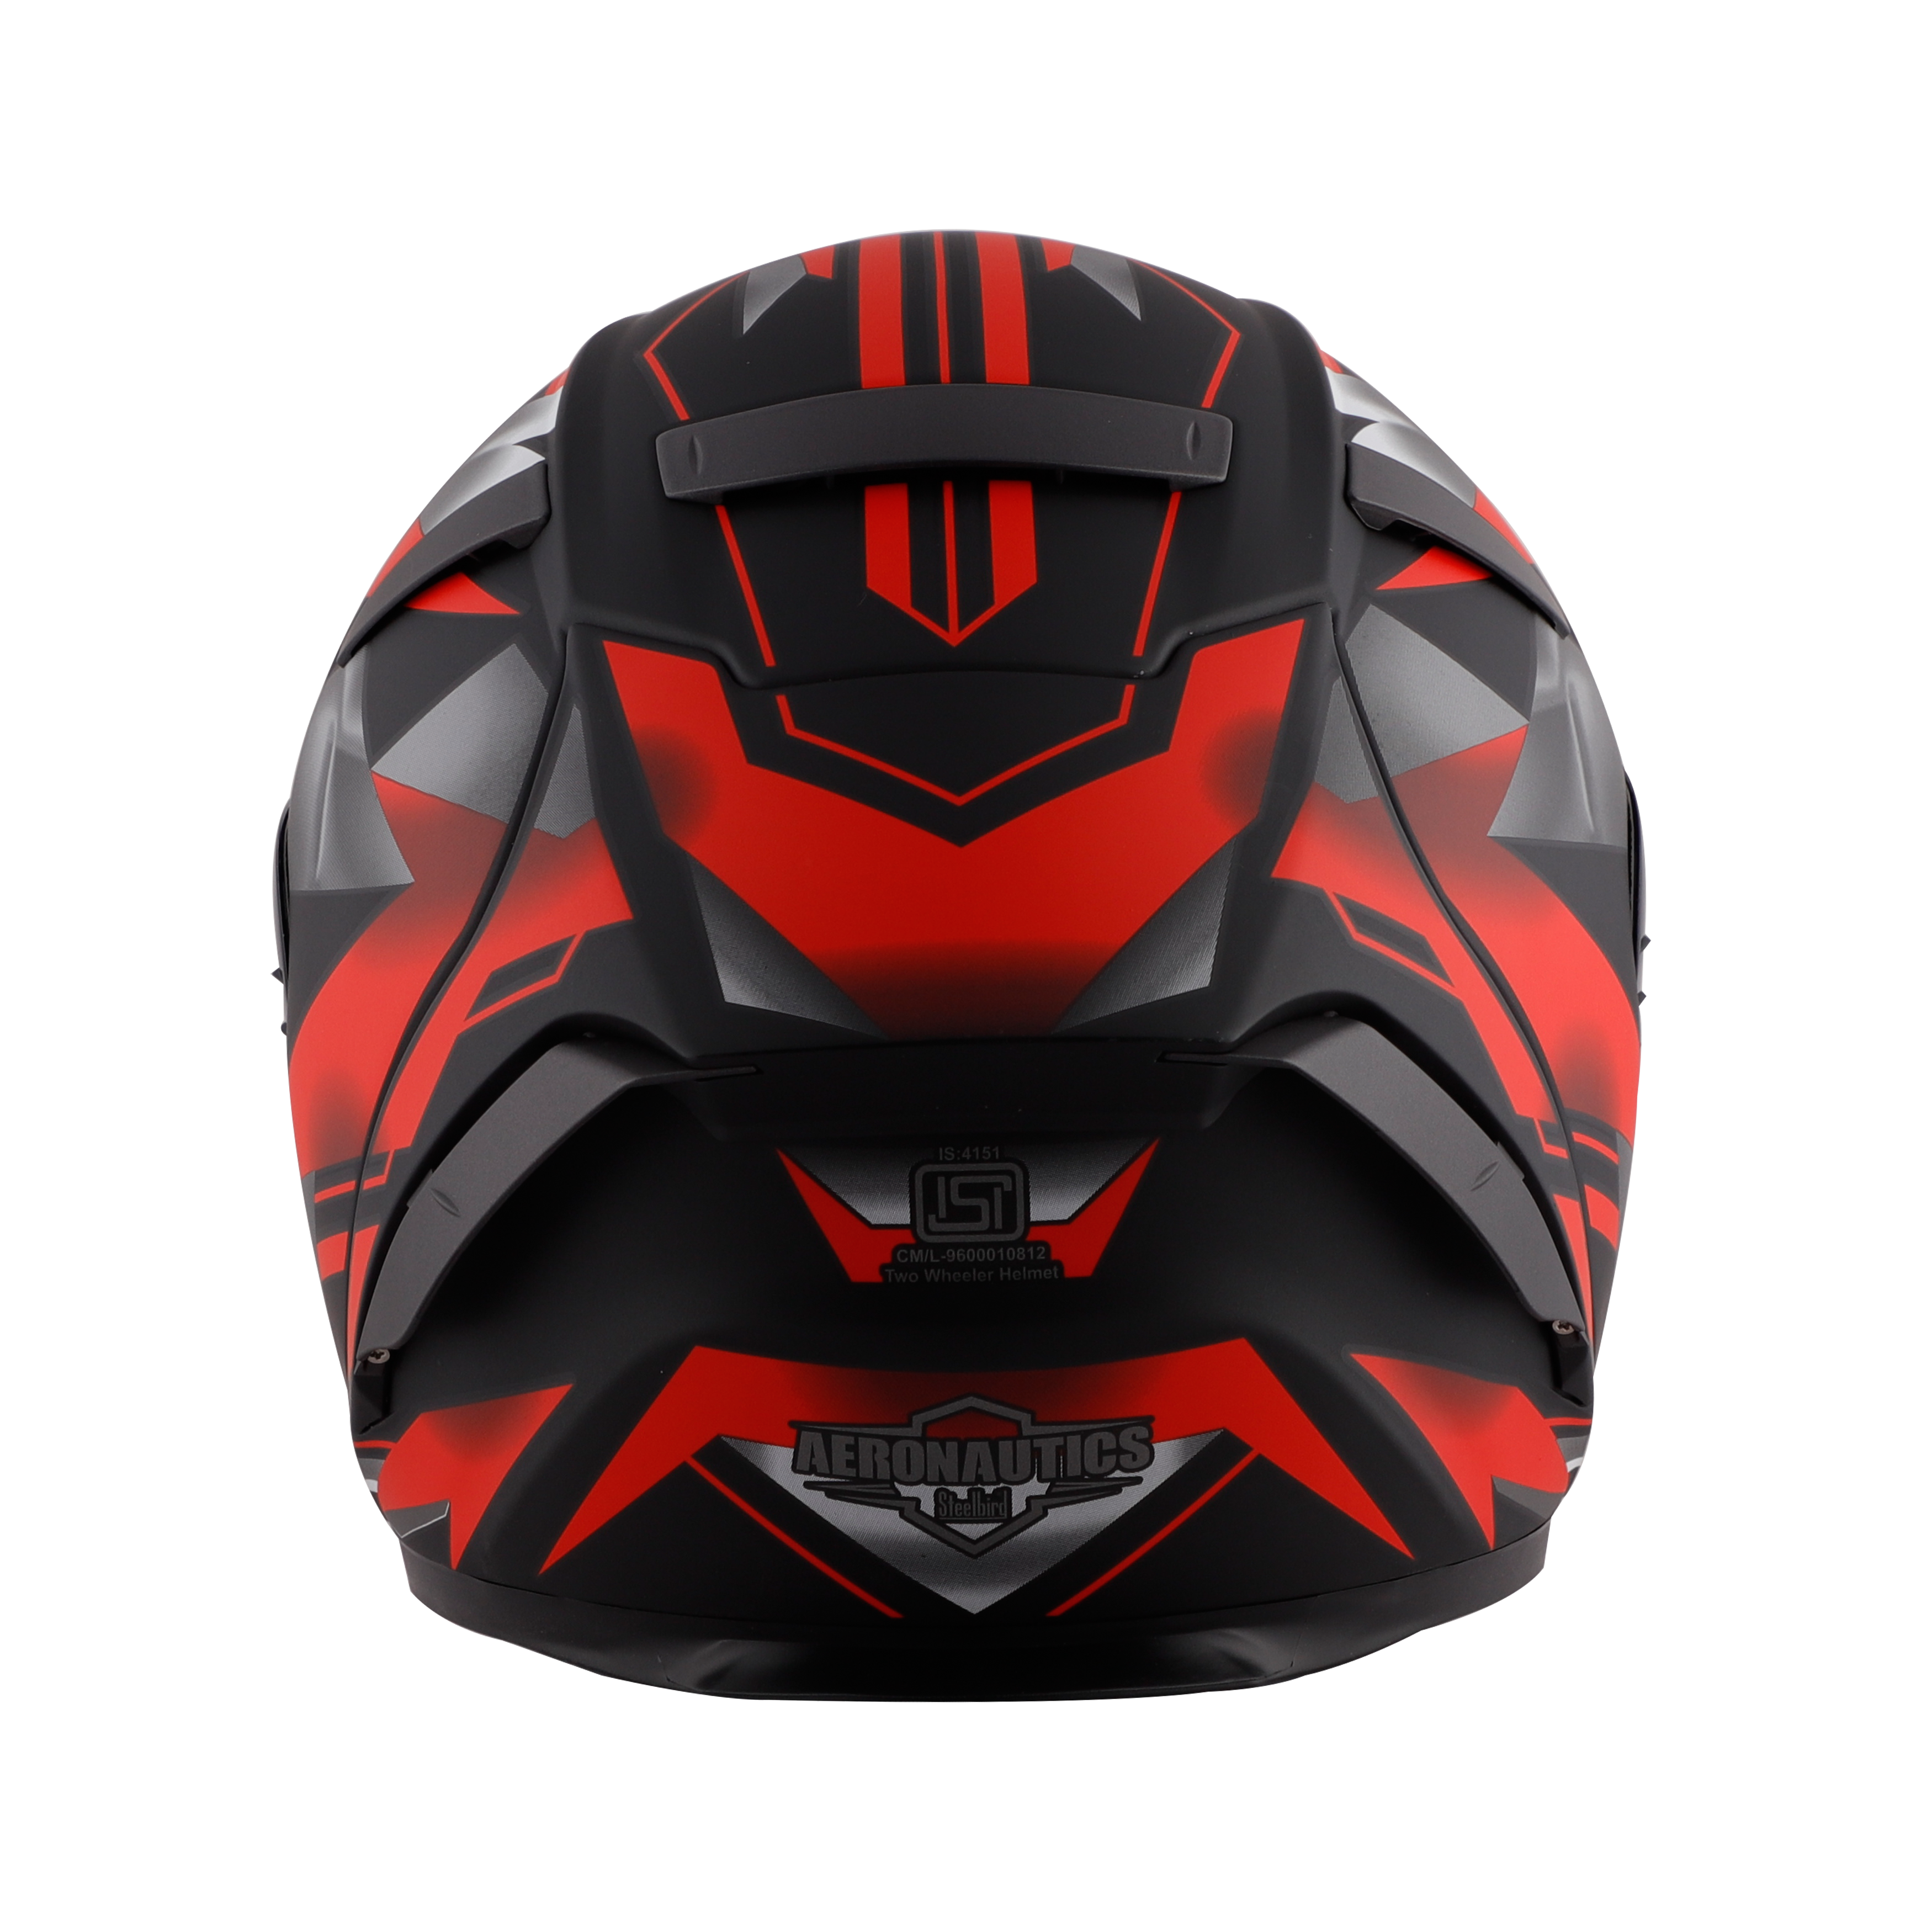 SA-2 METALLIC MAT BLACK WITH RED ( FITTED WITH CLEAR VISOR  EXTRA CHROME GOLD VISOR FREE) WITH ANTI-FOG SHIELD HOLDER